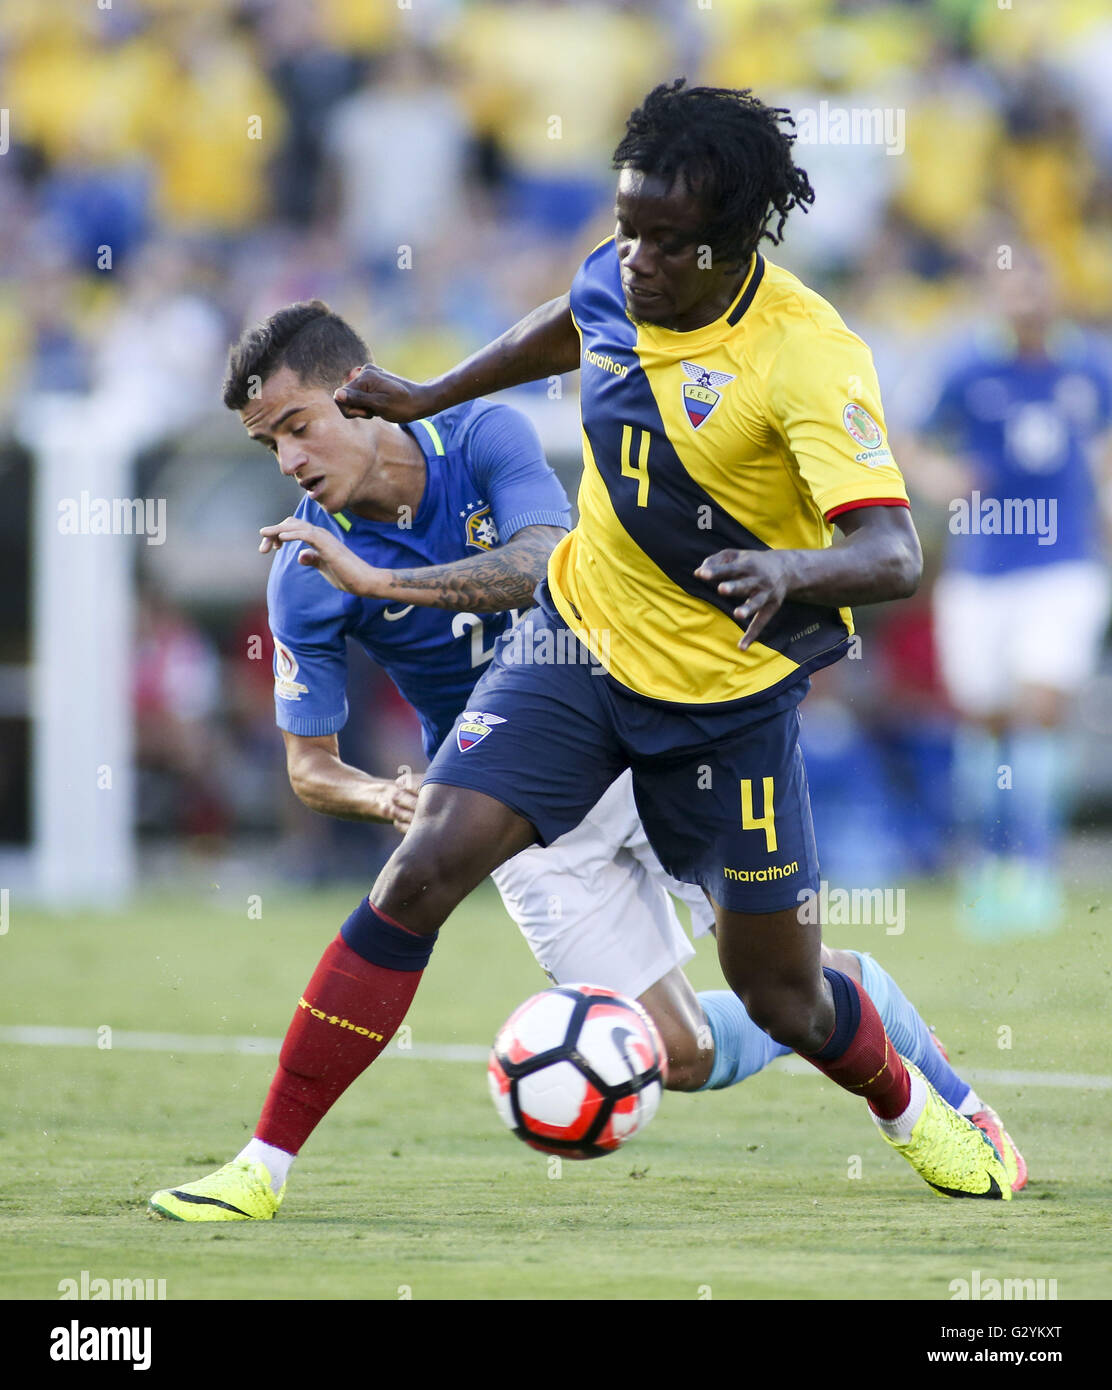 Los Angeles, California, USA. 4th June, 2016. cuador defender Juan Carlos Paredes #4 and Brazil midfielder Philippe Coutinho #22 in actions during a Copa America soccer match between Brazil and Ecuador at the Rose Bowl in Pasadena, California, June 4, 2016. © Ringo Chiu/ZUMA Wire/Alamy Live News Stock Photo